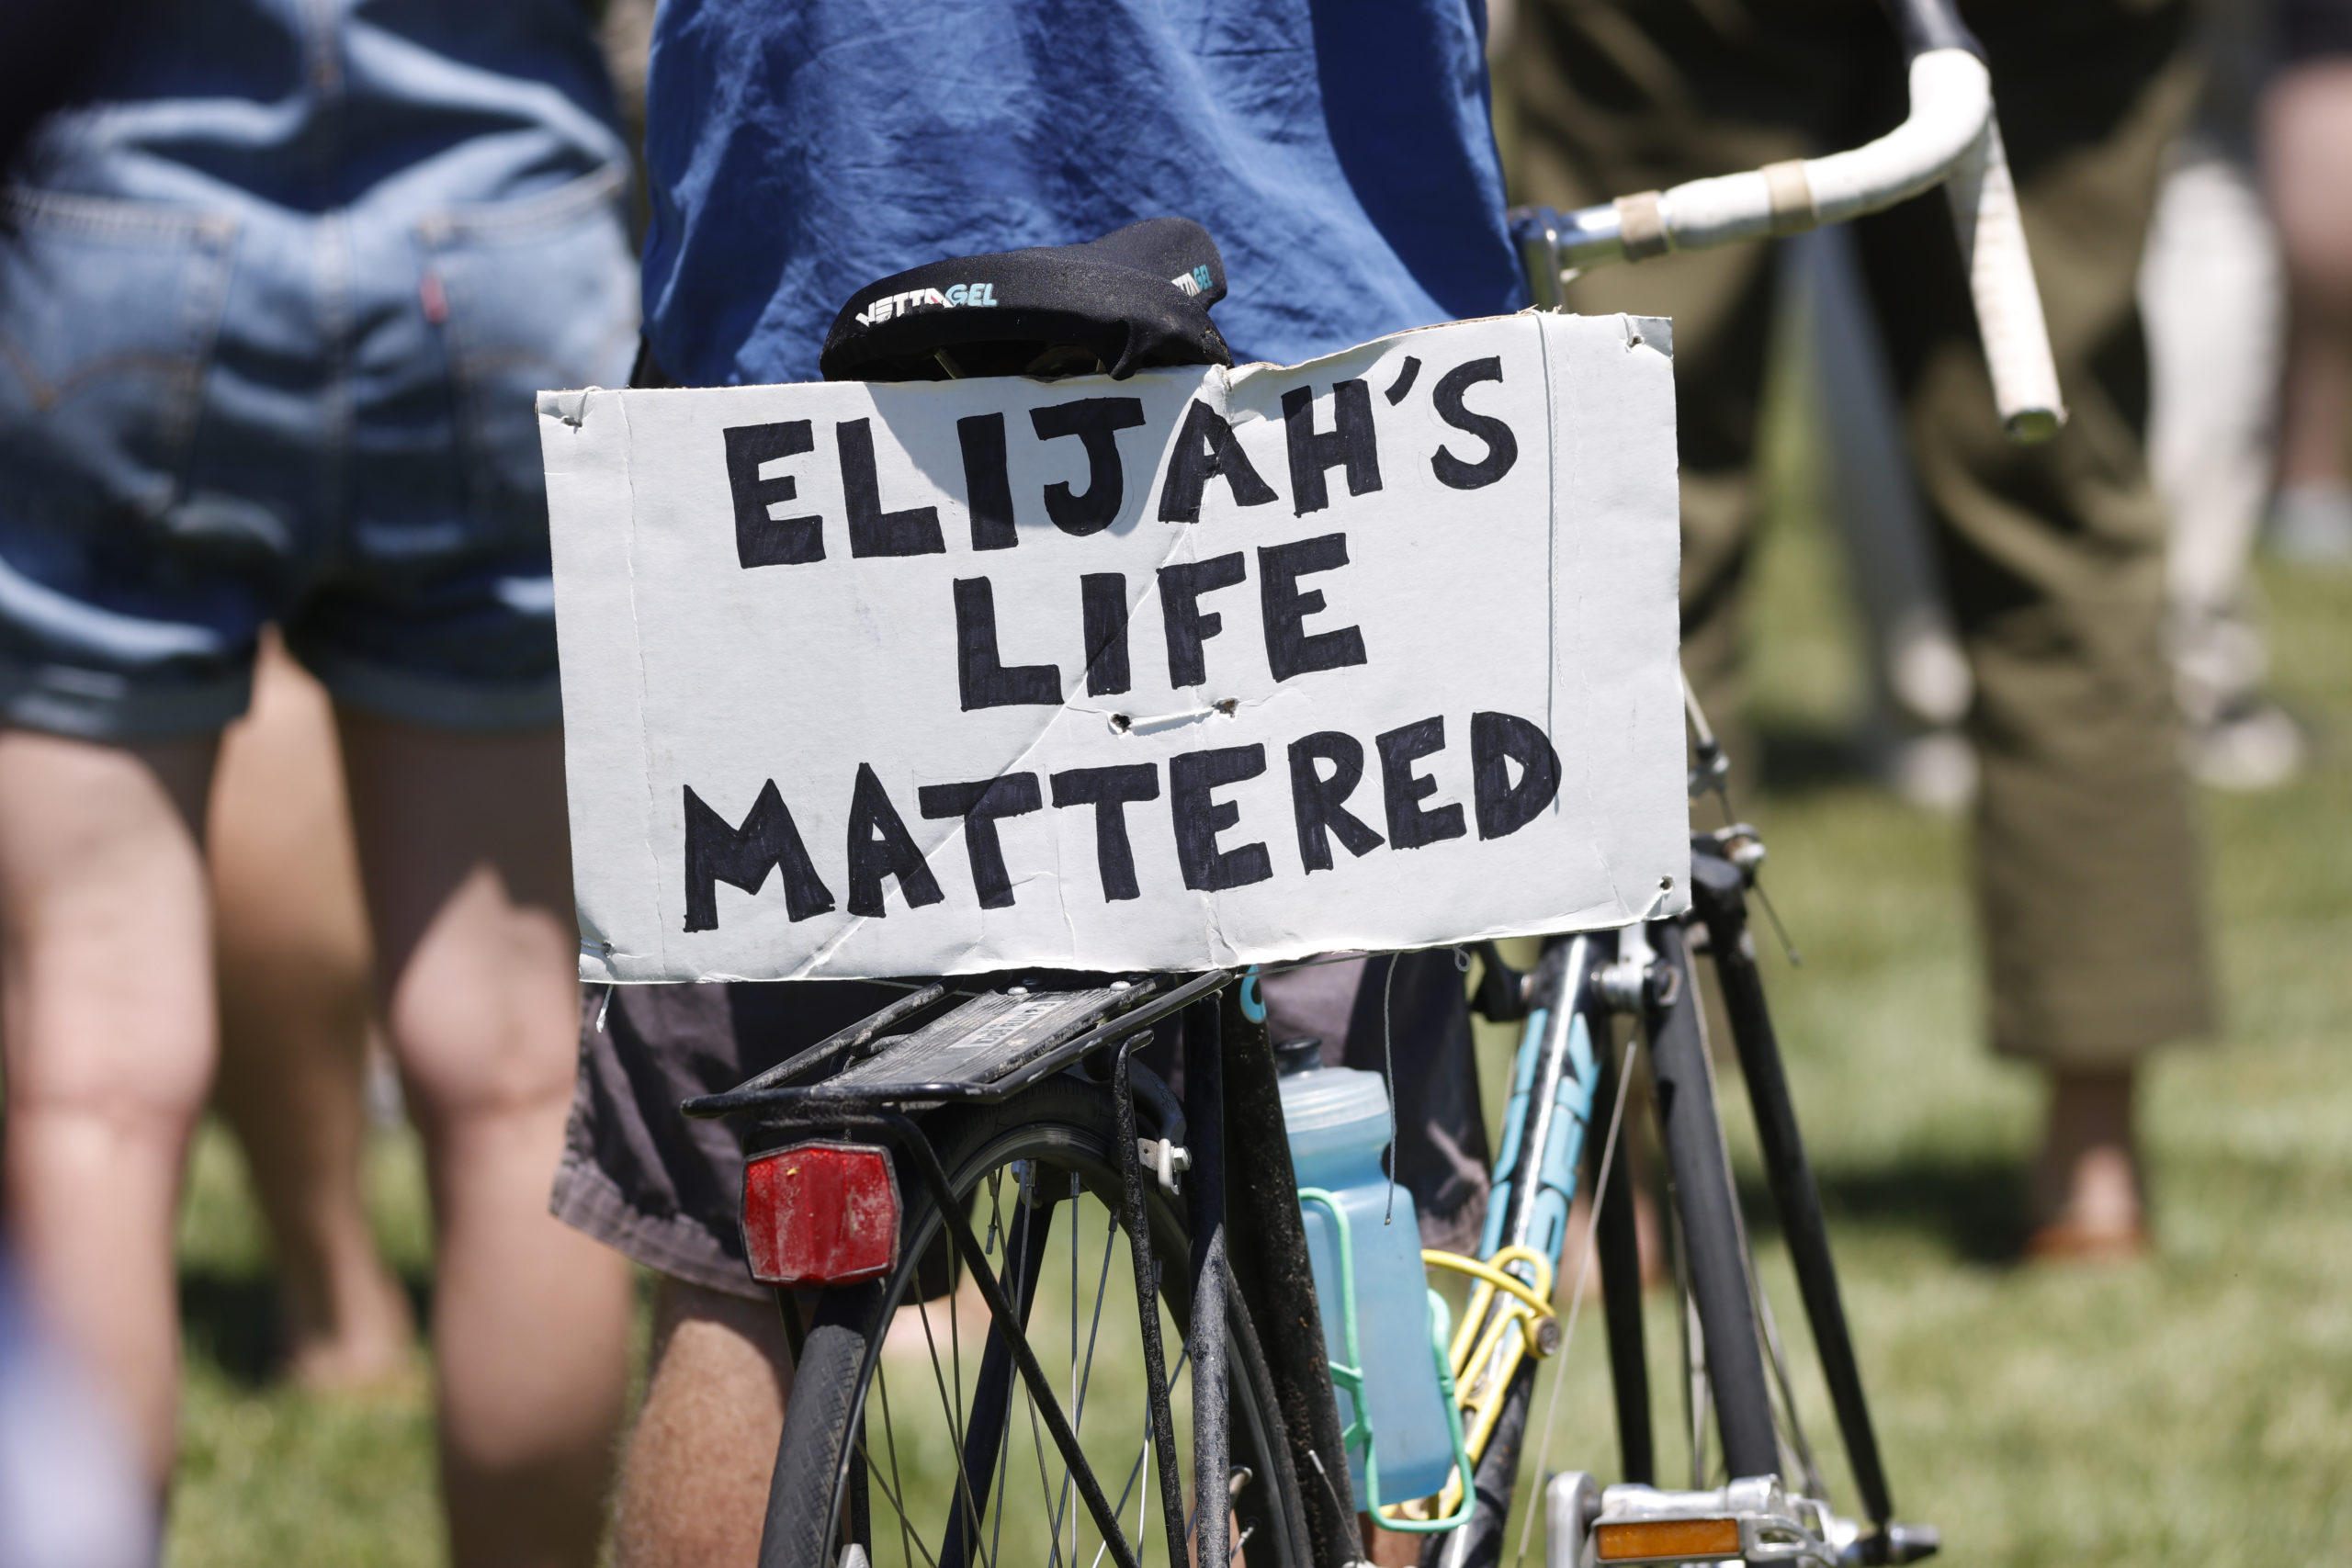 A placard is displayed on a bicycle during a rally and march over the death of 23-year-old Elijah McClain, Saturday, June 27, 2020, outside the police department in Aurora, Colorado. McClain died in late August 2019, after he was stopped while walking to his apartment by three Aurora Police Department officers. Photo credit: David Zalubowski, The Associated Press